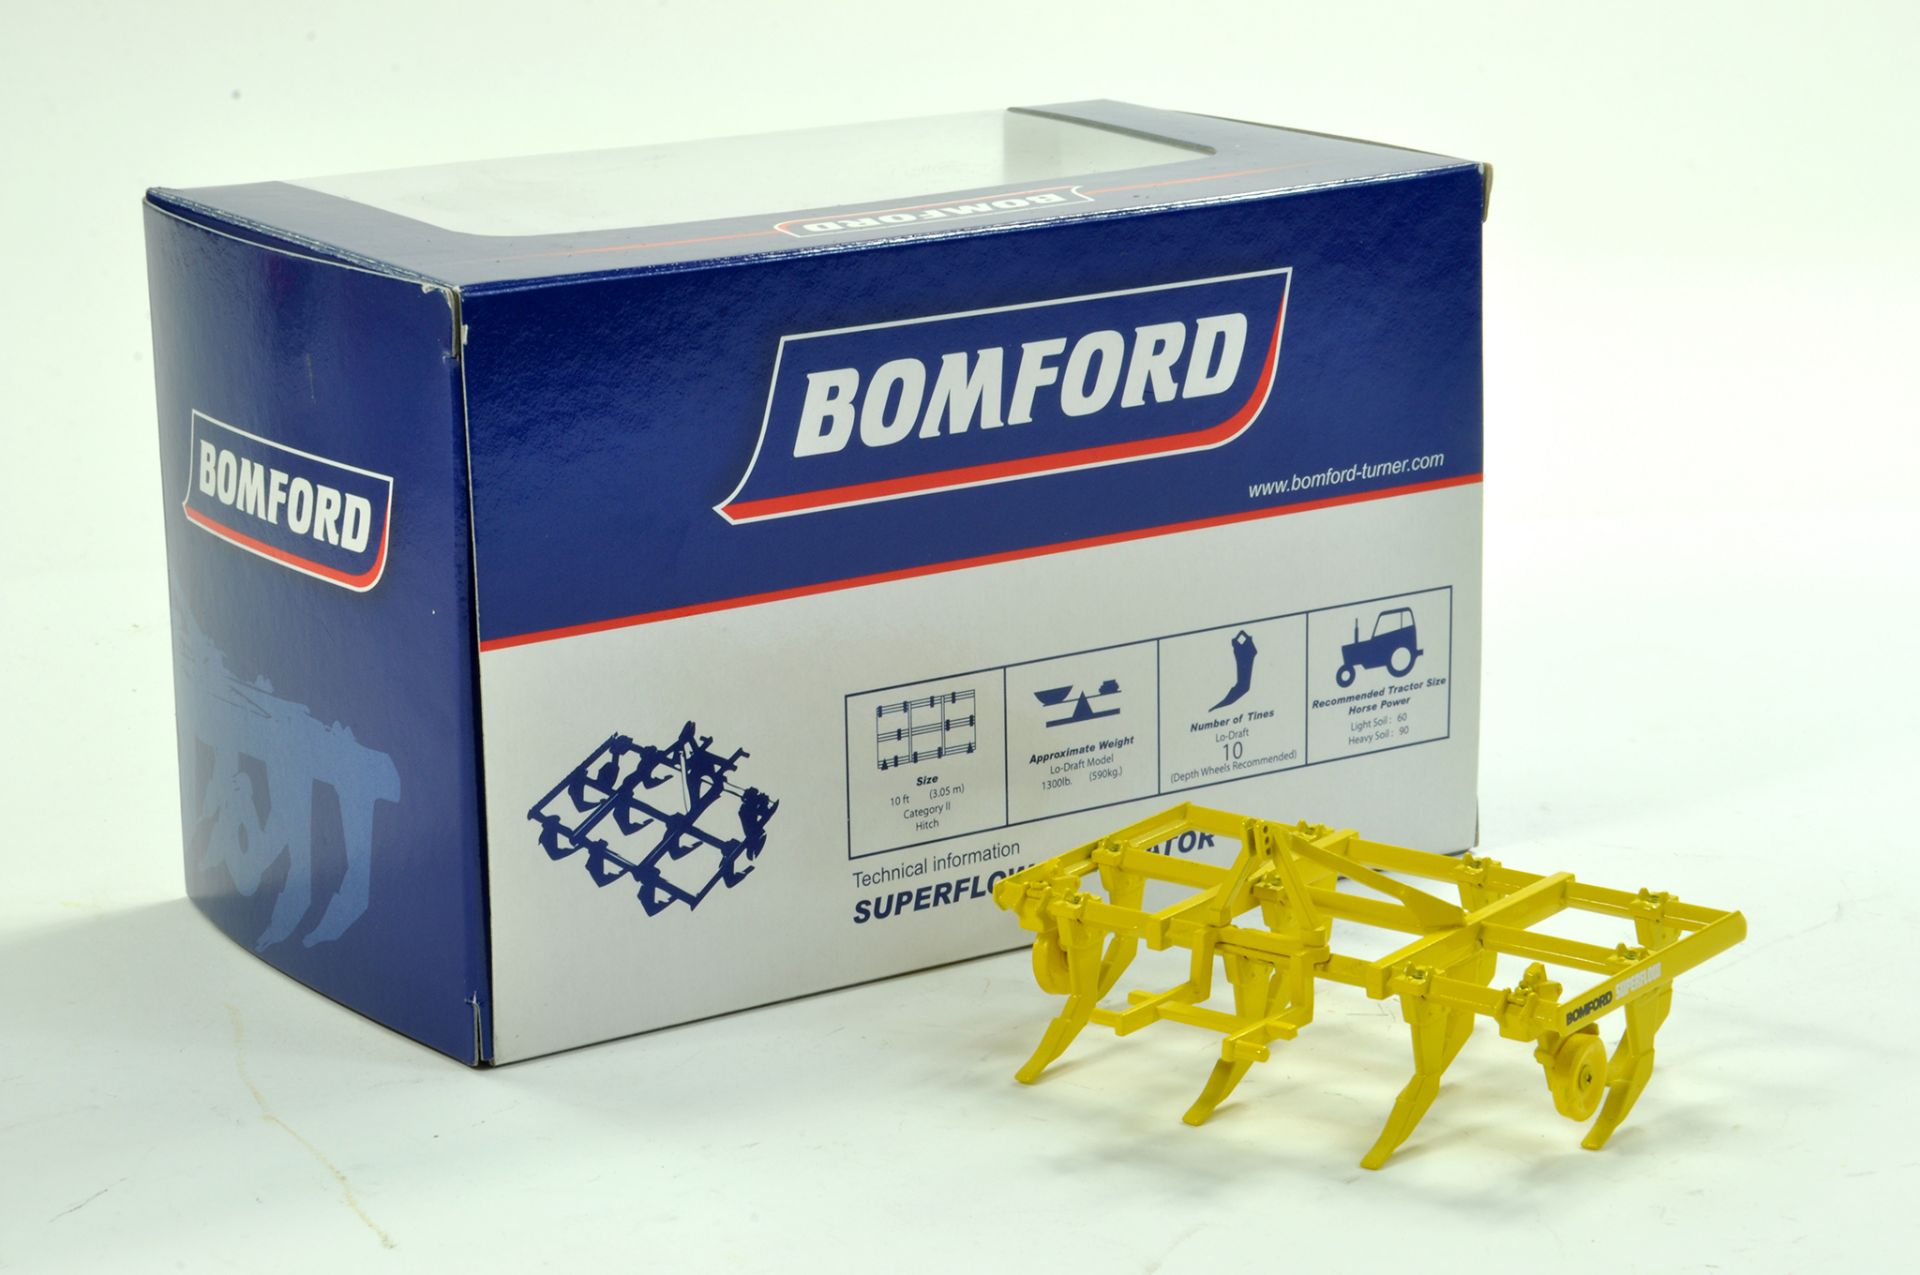 Universal Hobbies 1/32 Bomford Superflow Cultivator. Excellent, complete and with original box.